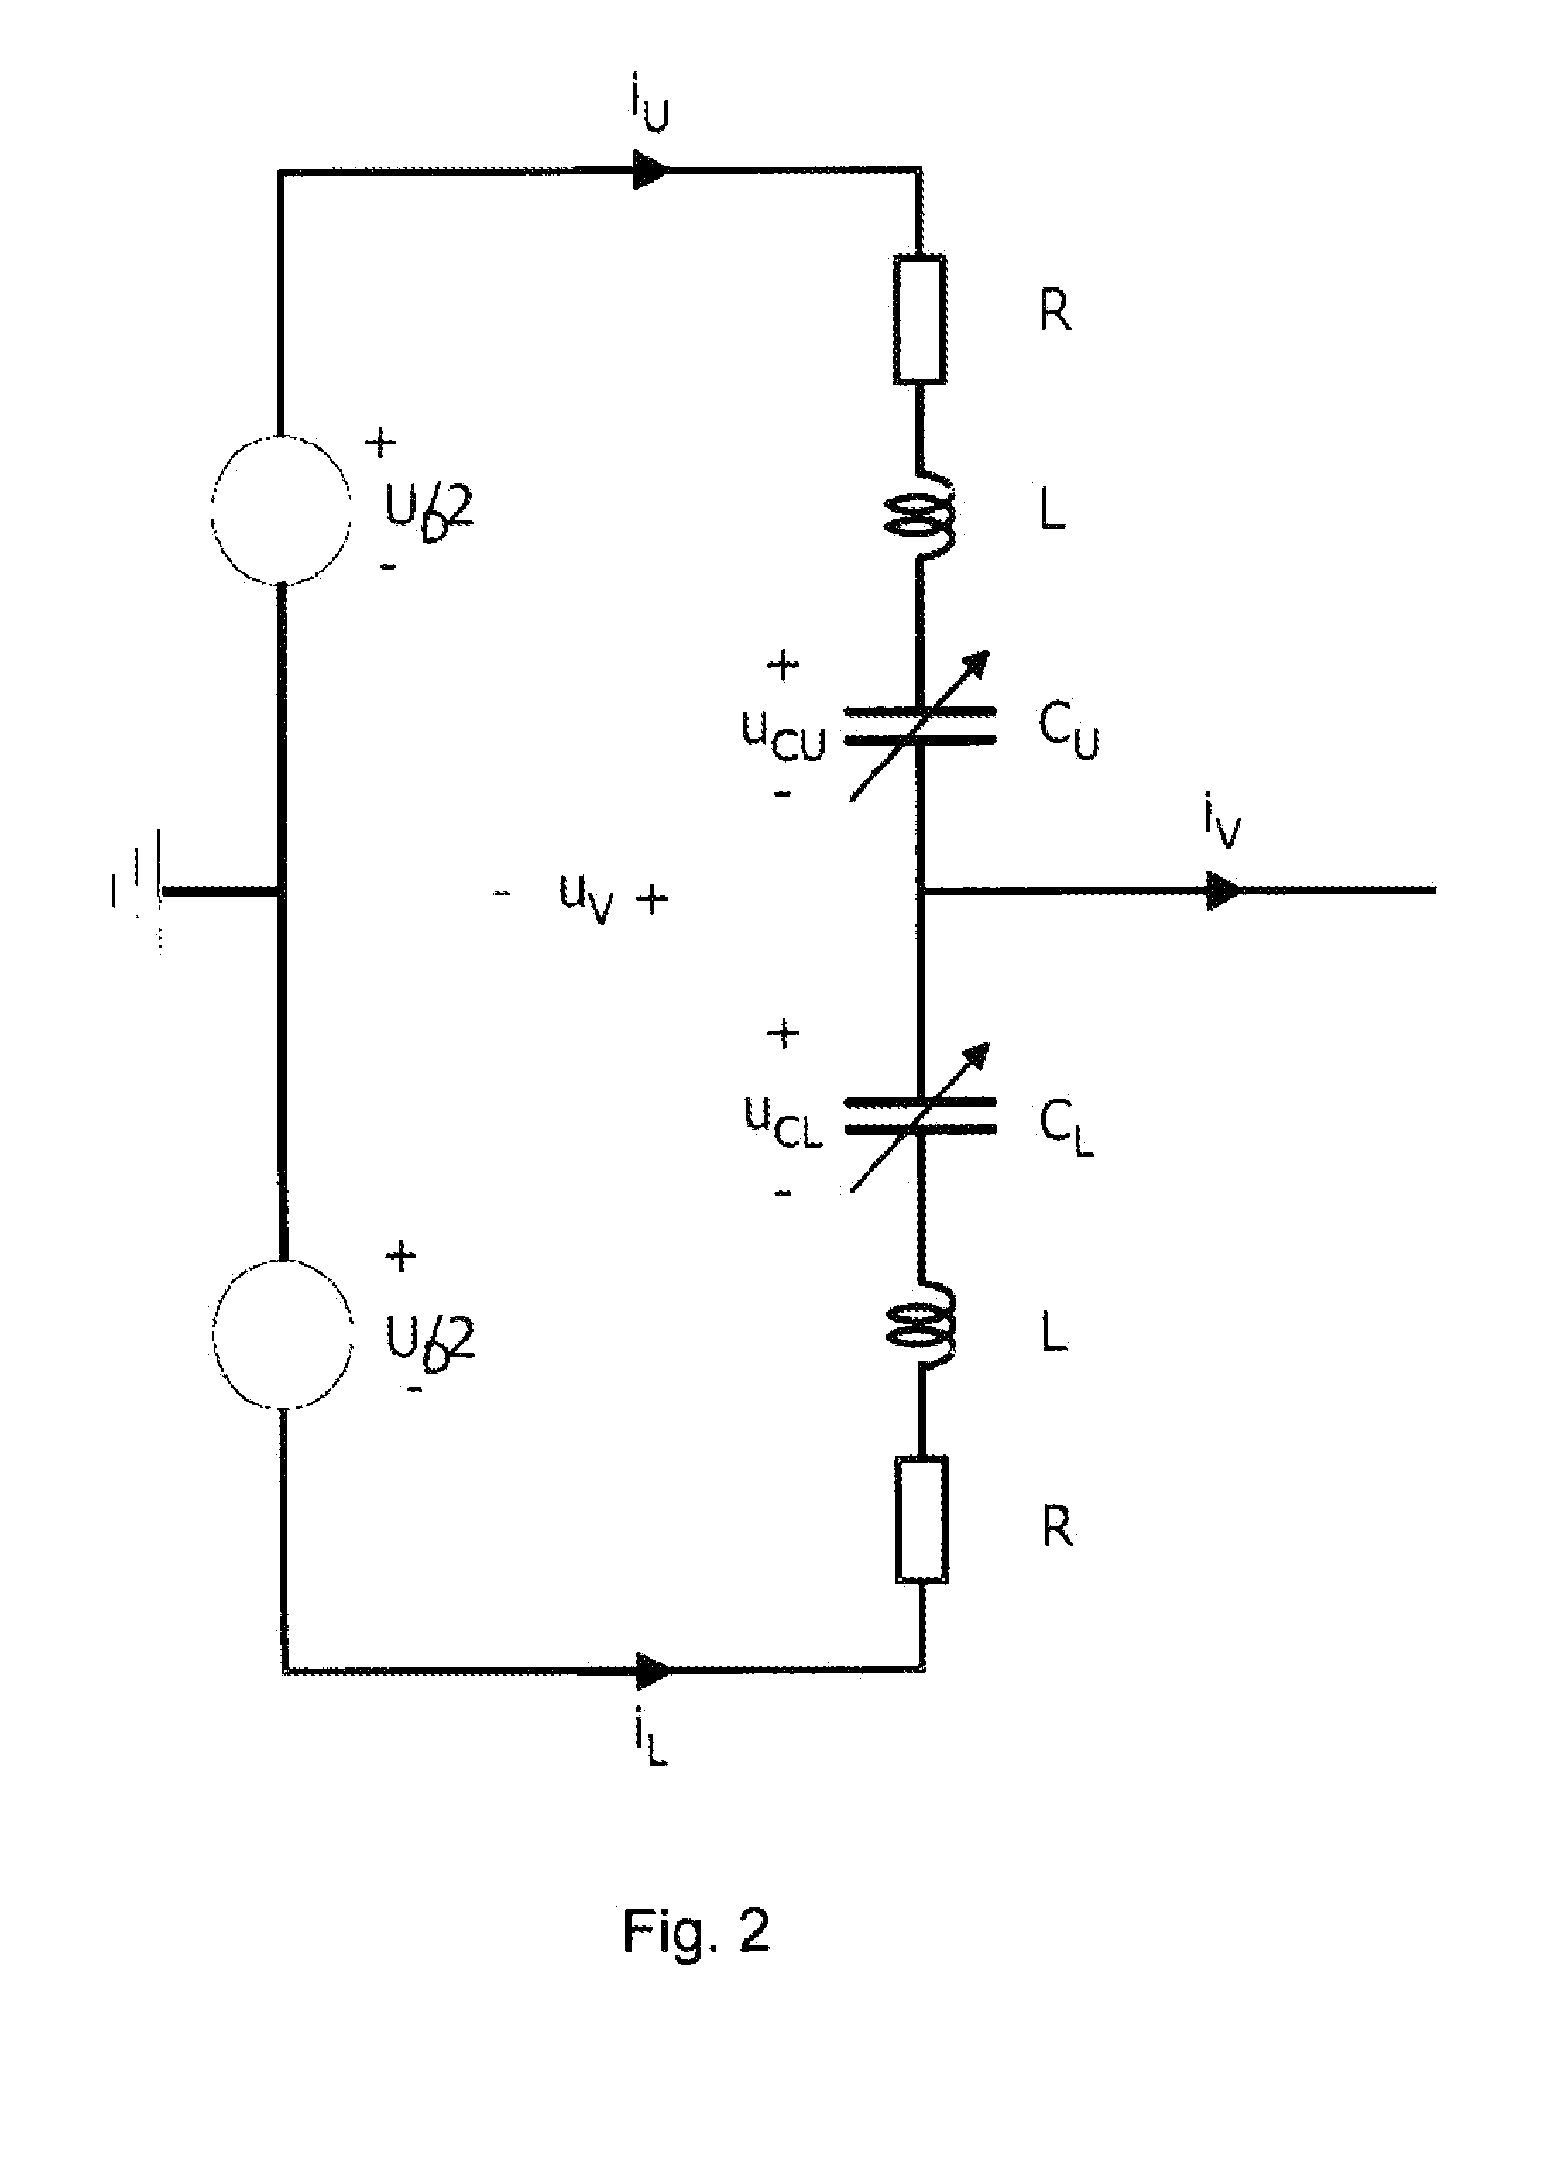 Method And Apparatus For Calculating Insertion Indeces For A Modular Multilevel Converter